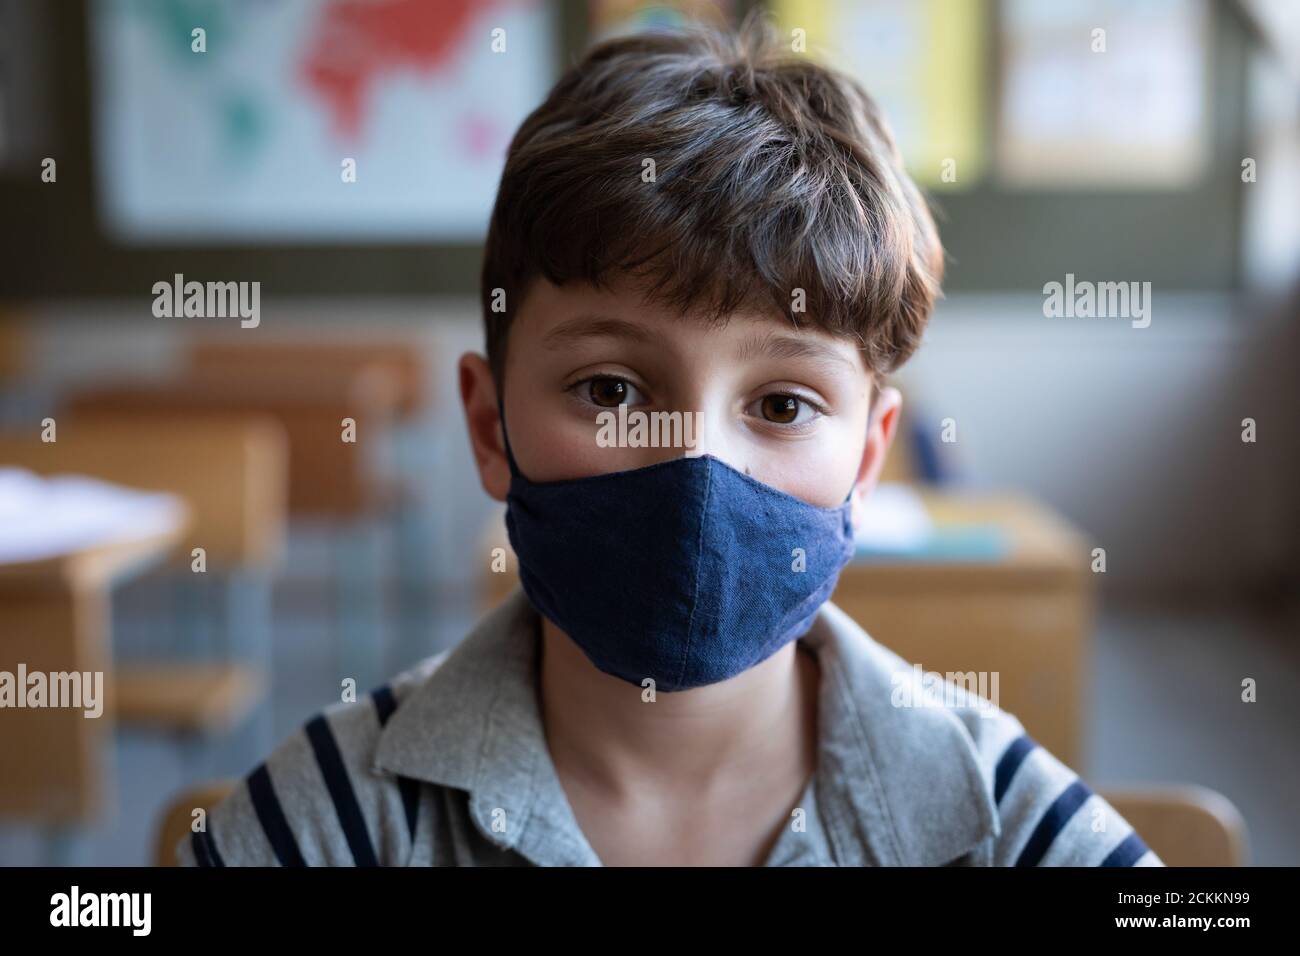 Portrait of boy wearing face mask at school Stock Photo